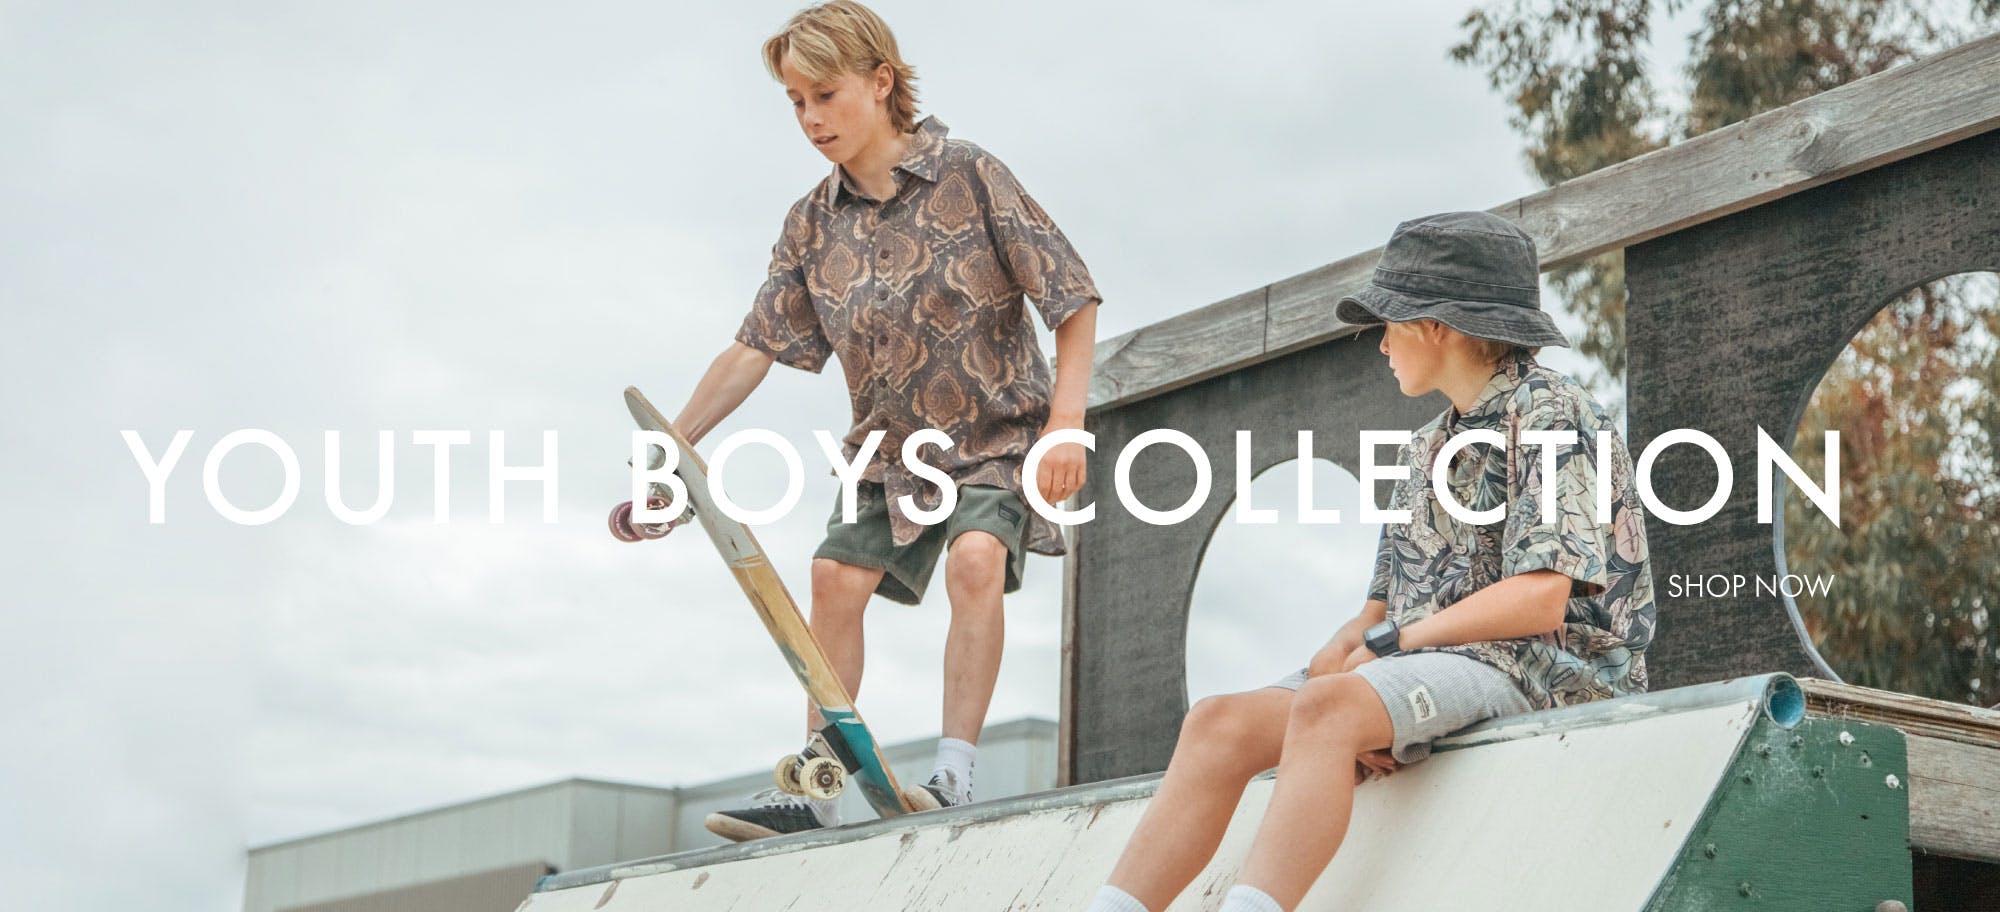 Two teenagers at skate park with Youth Boys Collection in white text overlay. Left boy stands holding skateboard in paisley Shirt, right boy sits with blue Bucket Hat & paisley short sleeve Shirt.